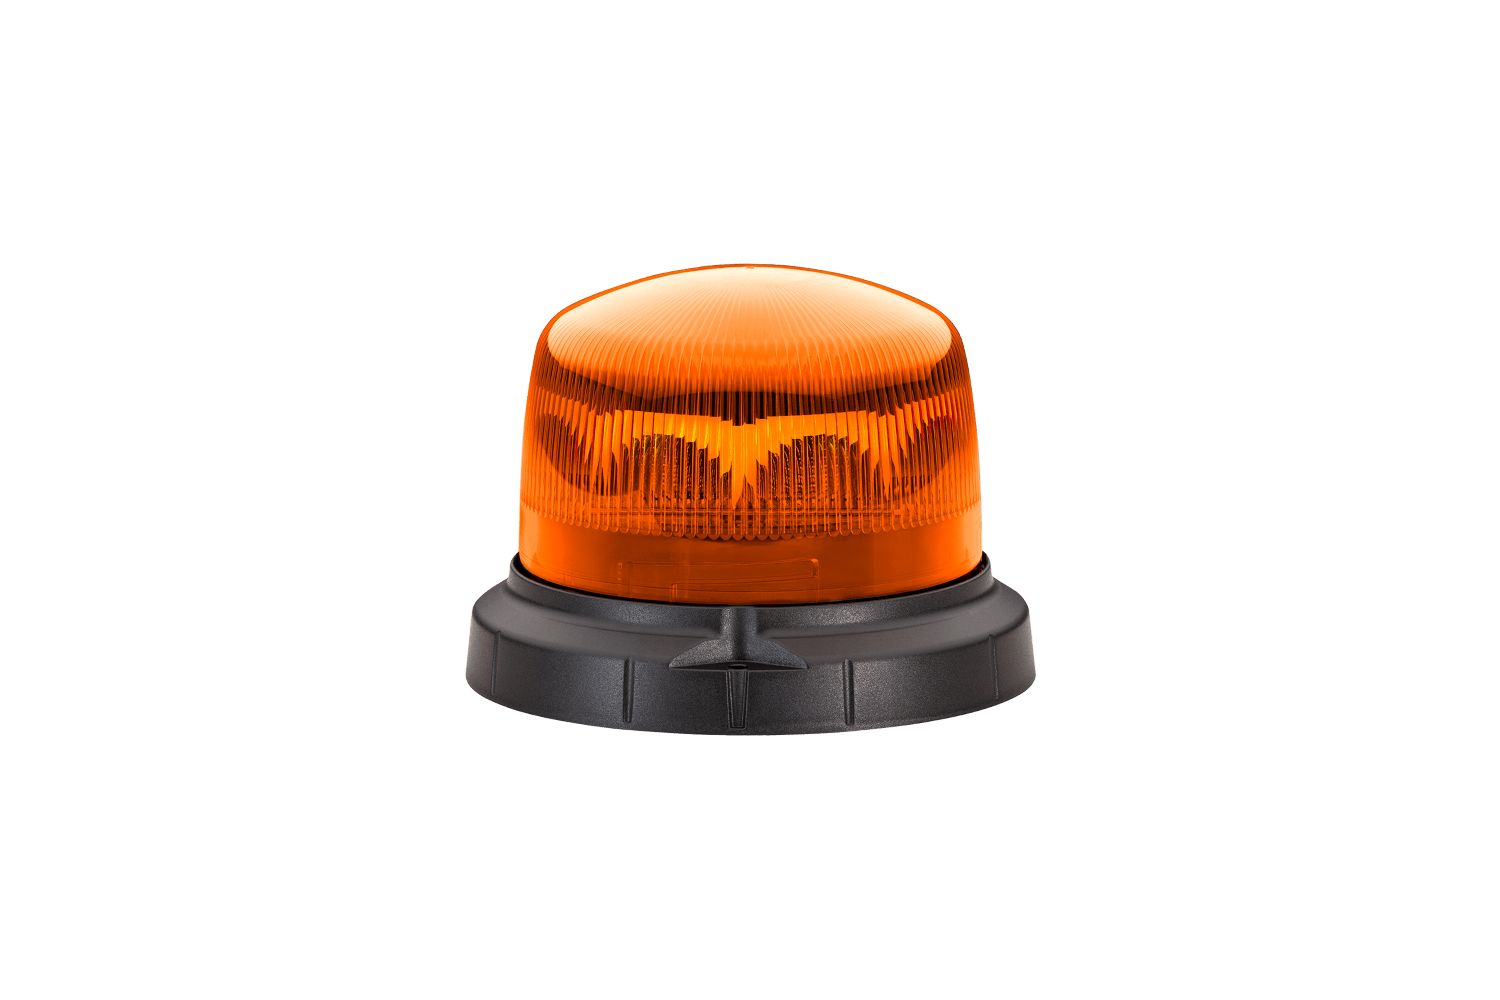 Rota LED Compact warning lamp from Hella offered by Patlon